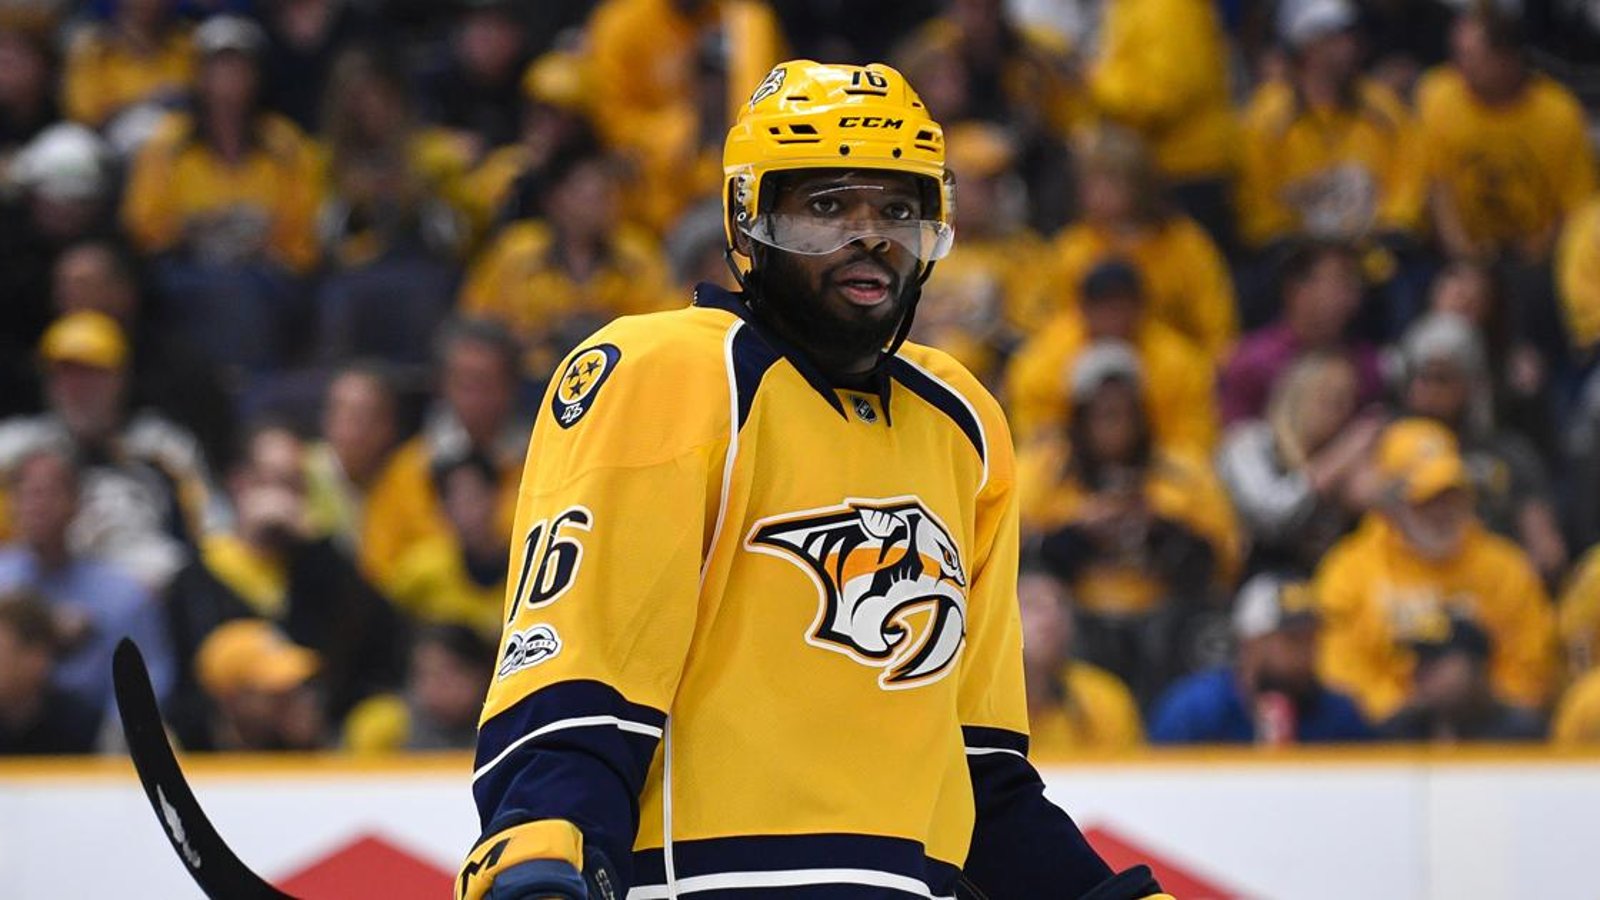 MUST SEE : P.K. Subban warmup routine will mesmerize you! 